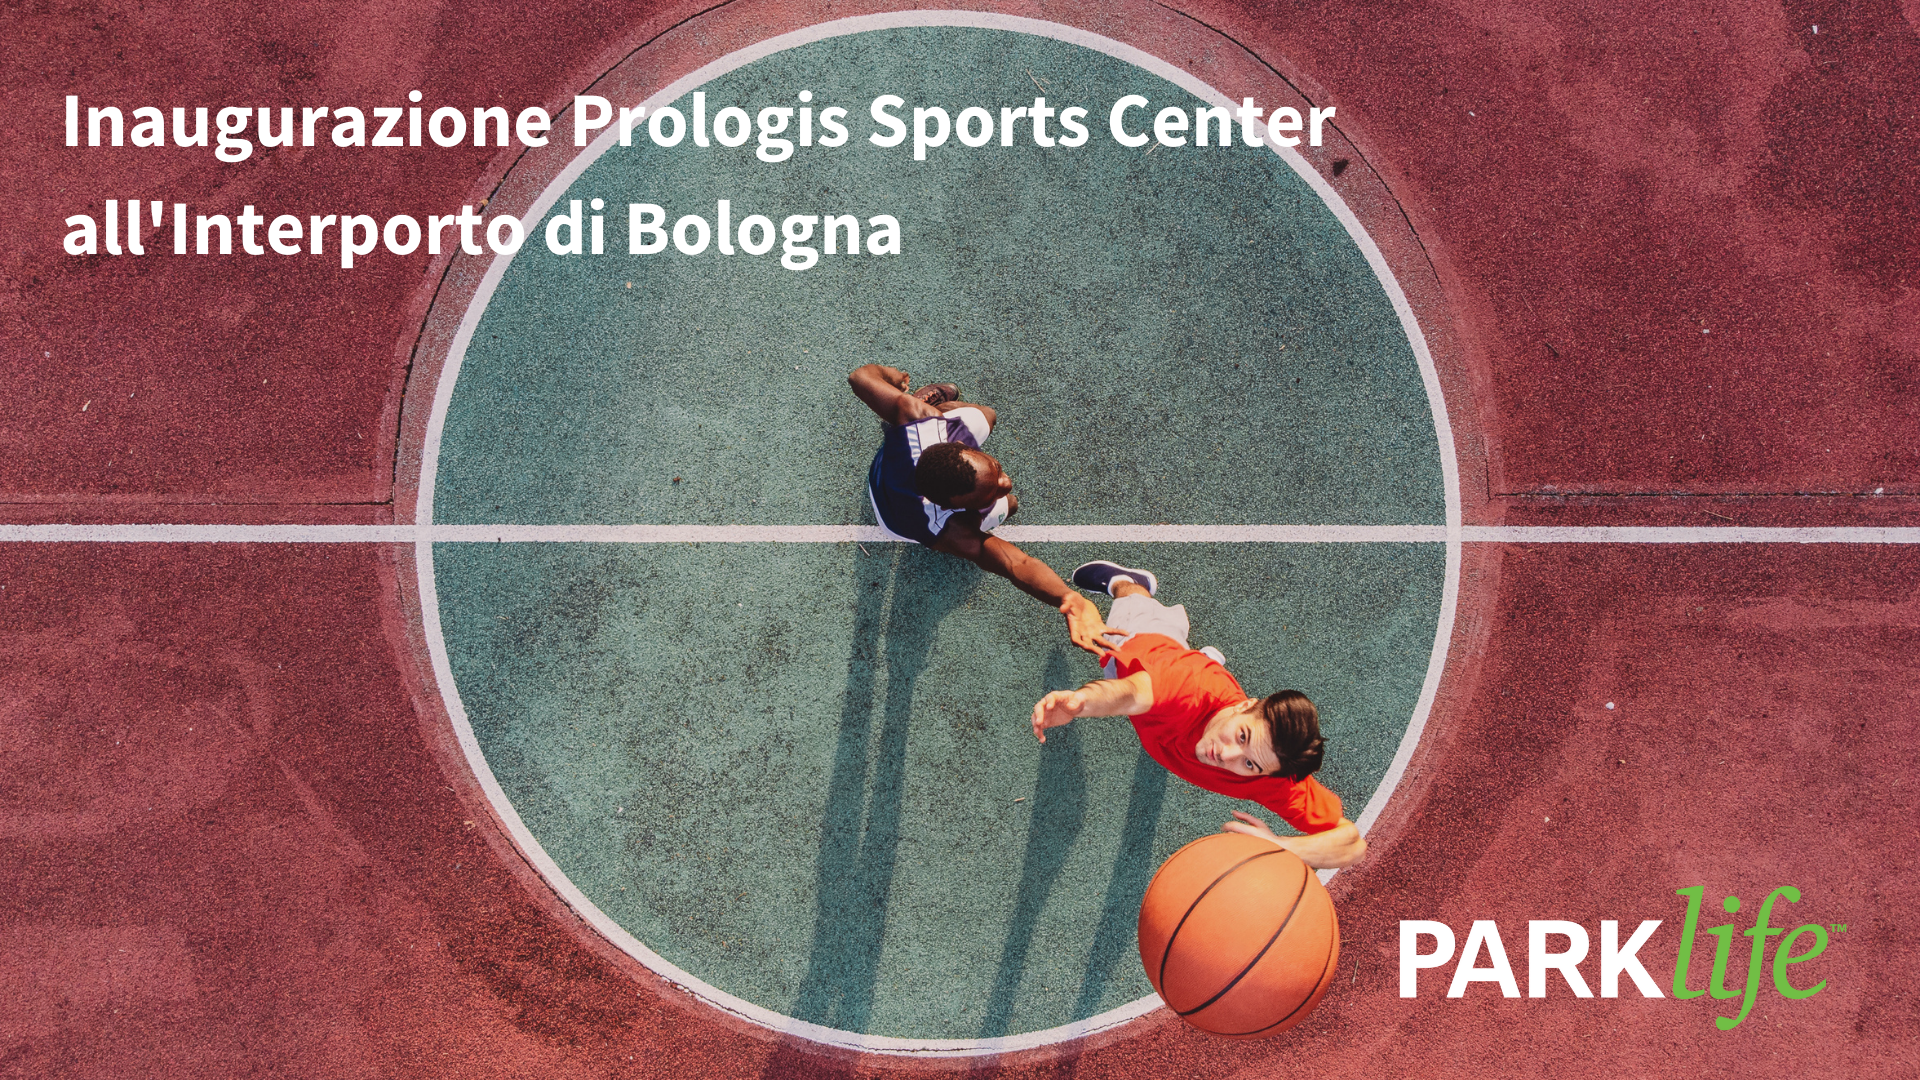 Come and join us on 18 June for a fun day out at Bologna Interporto, with music and tournaments open to all